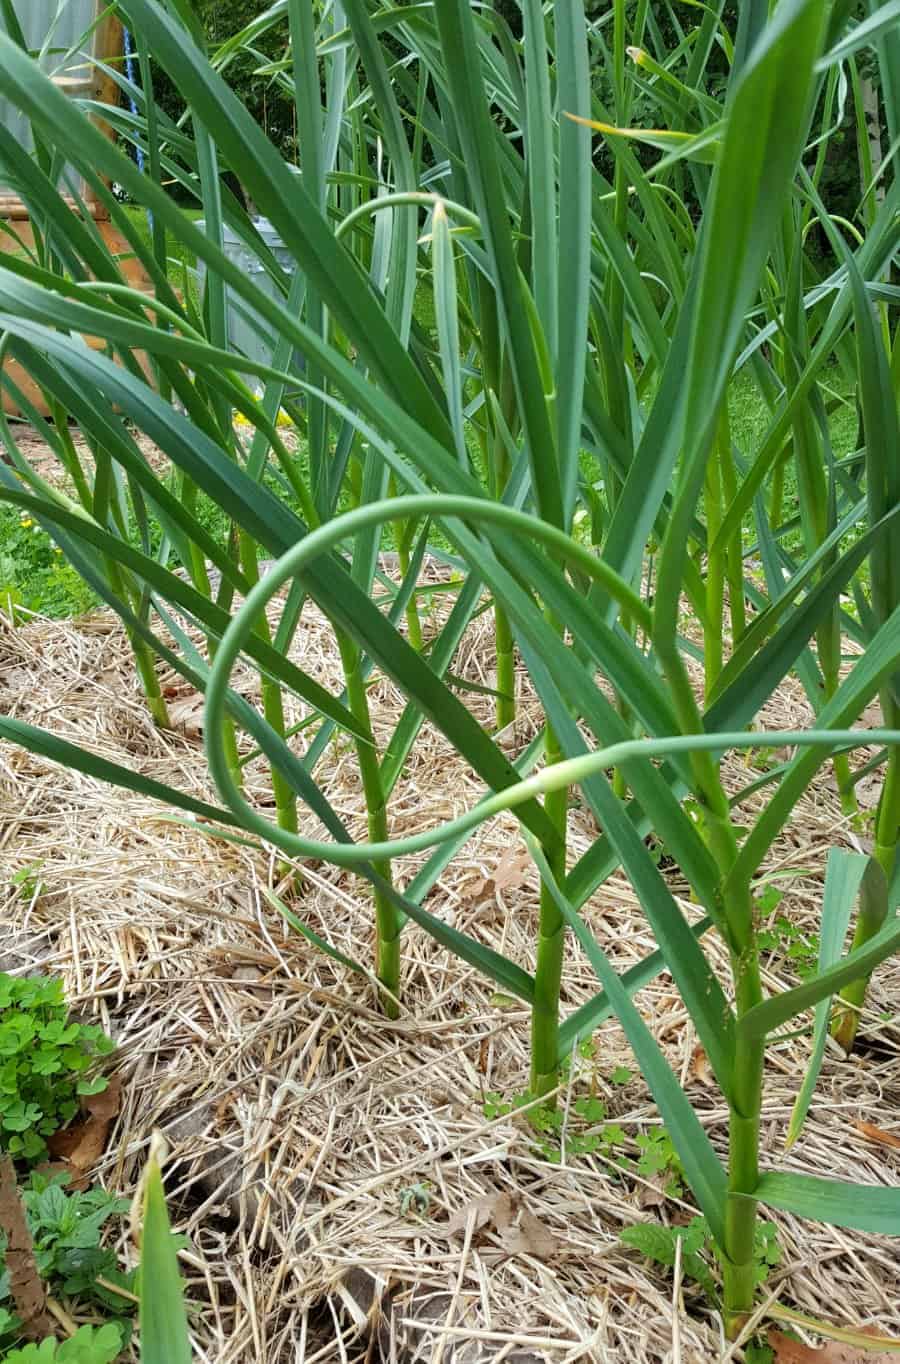 garlic plants with garlic scapes ready to be harvested